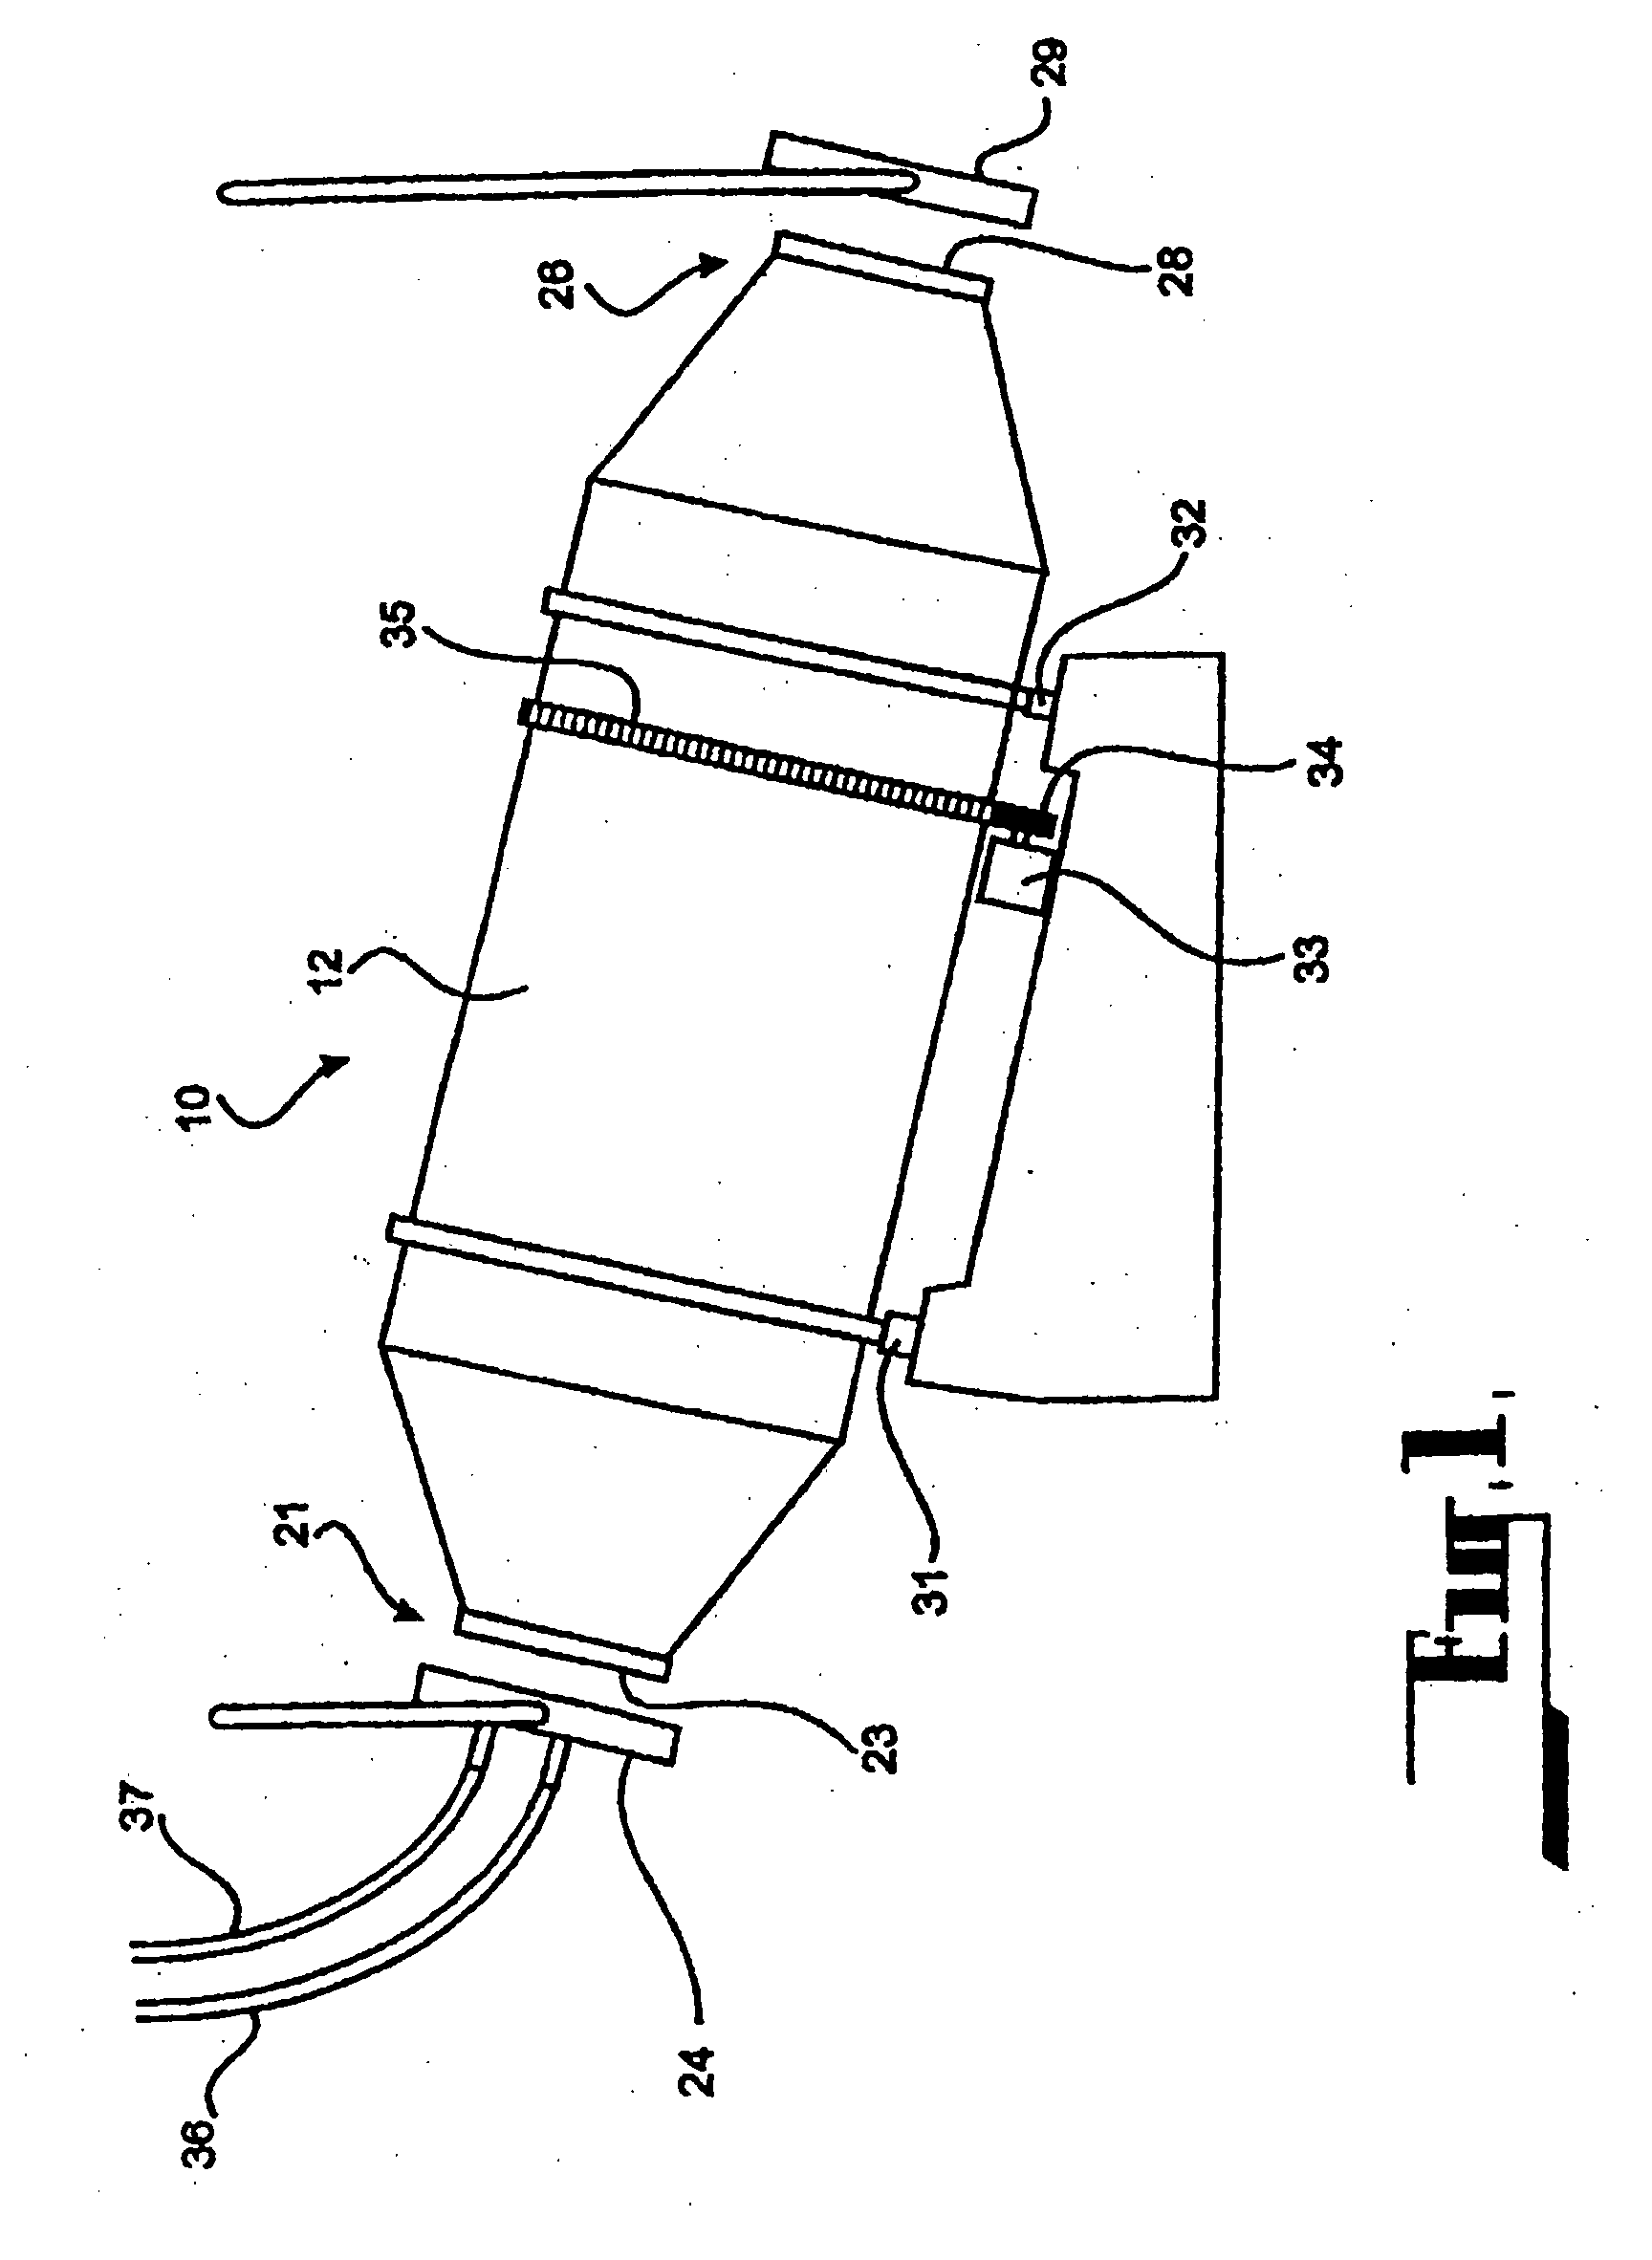 Method and Apparatus for Collection and Treatment of Encapsulated Waste